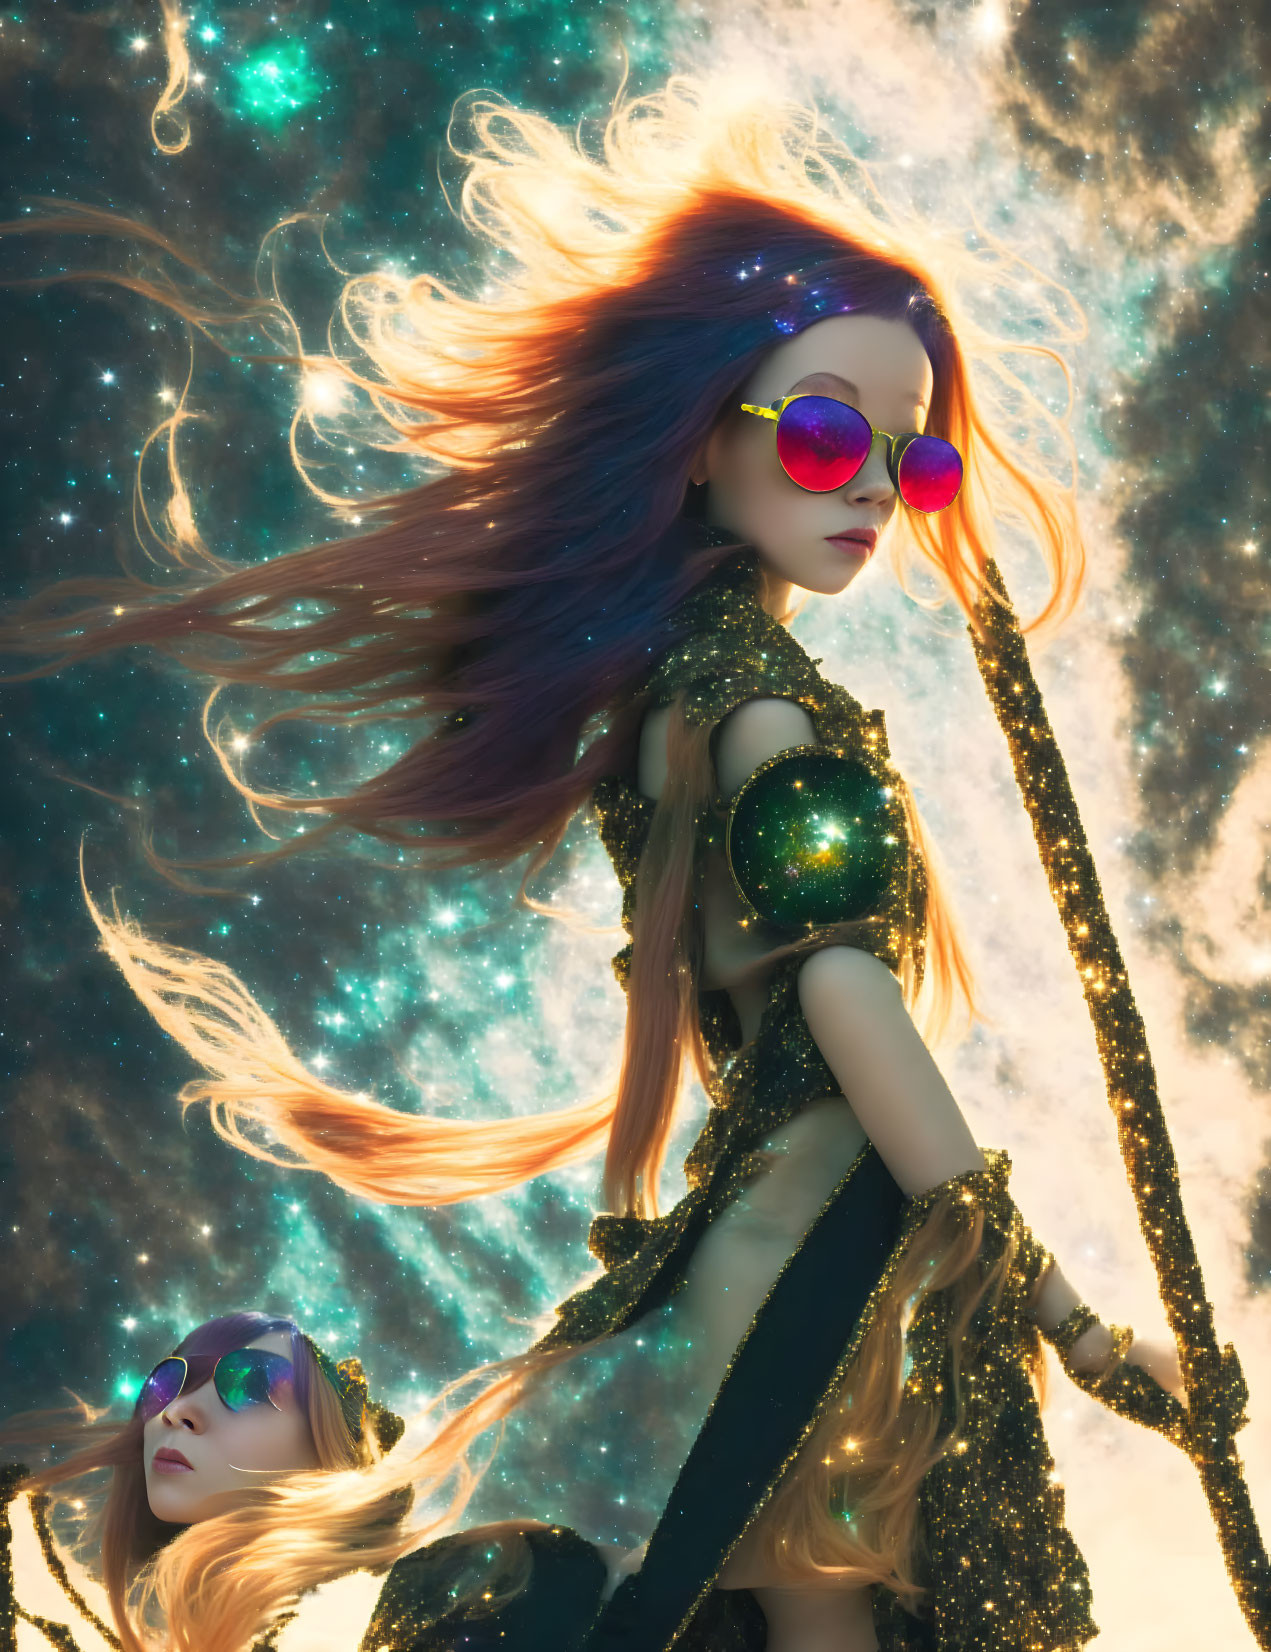 Colorful Hair Figures in Cosmic Outfits Against Starry Background